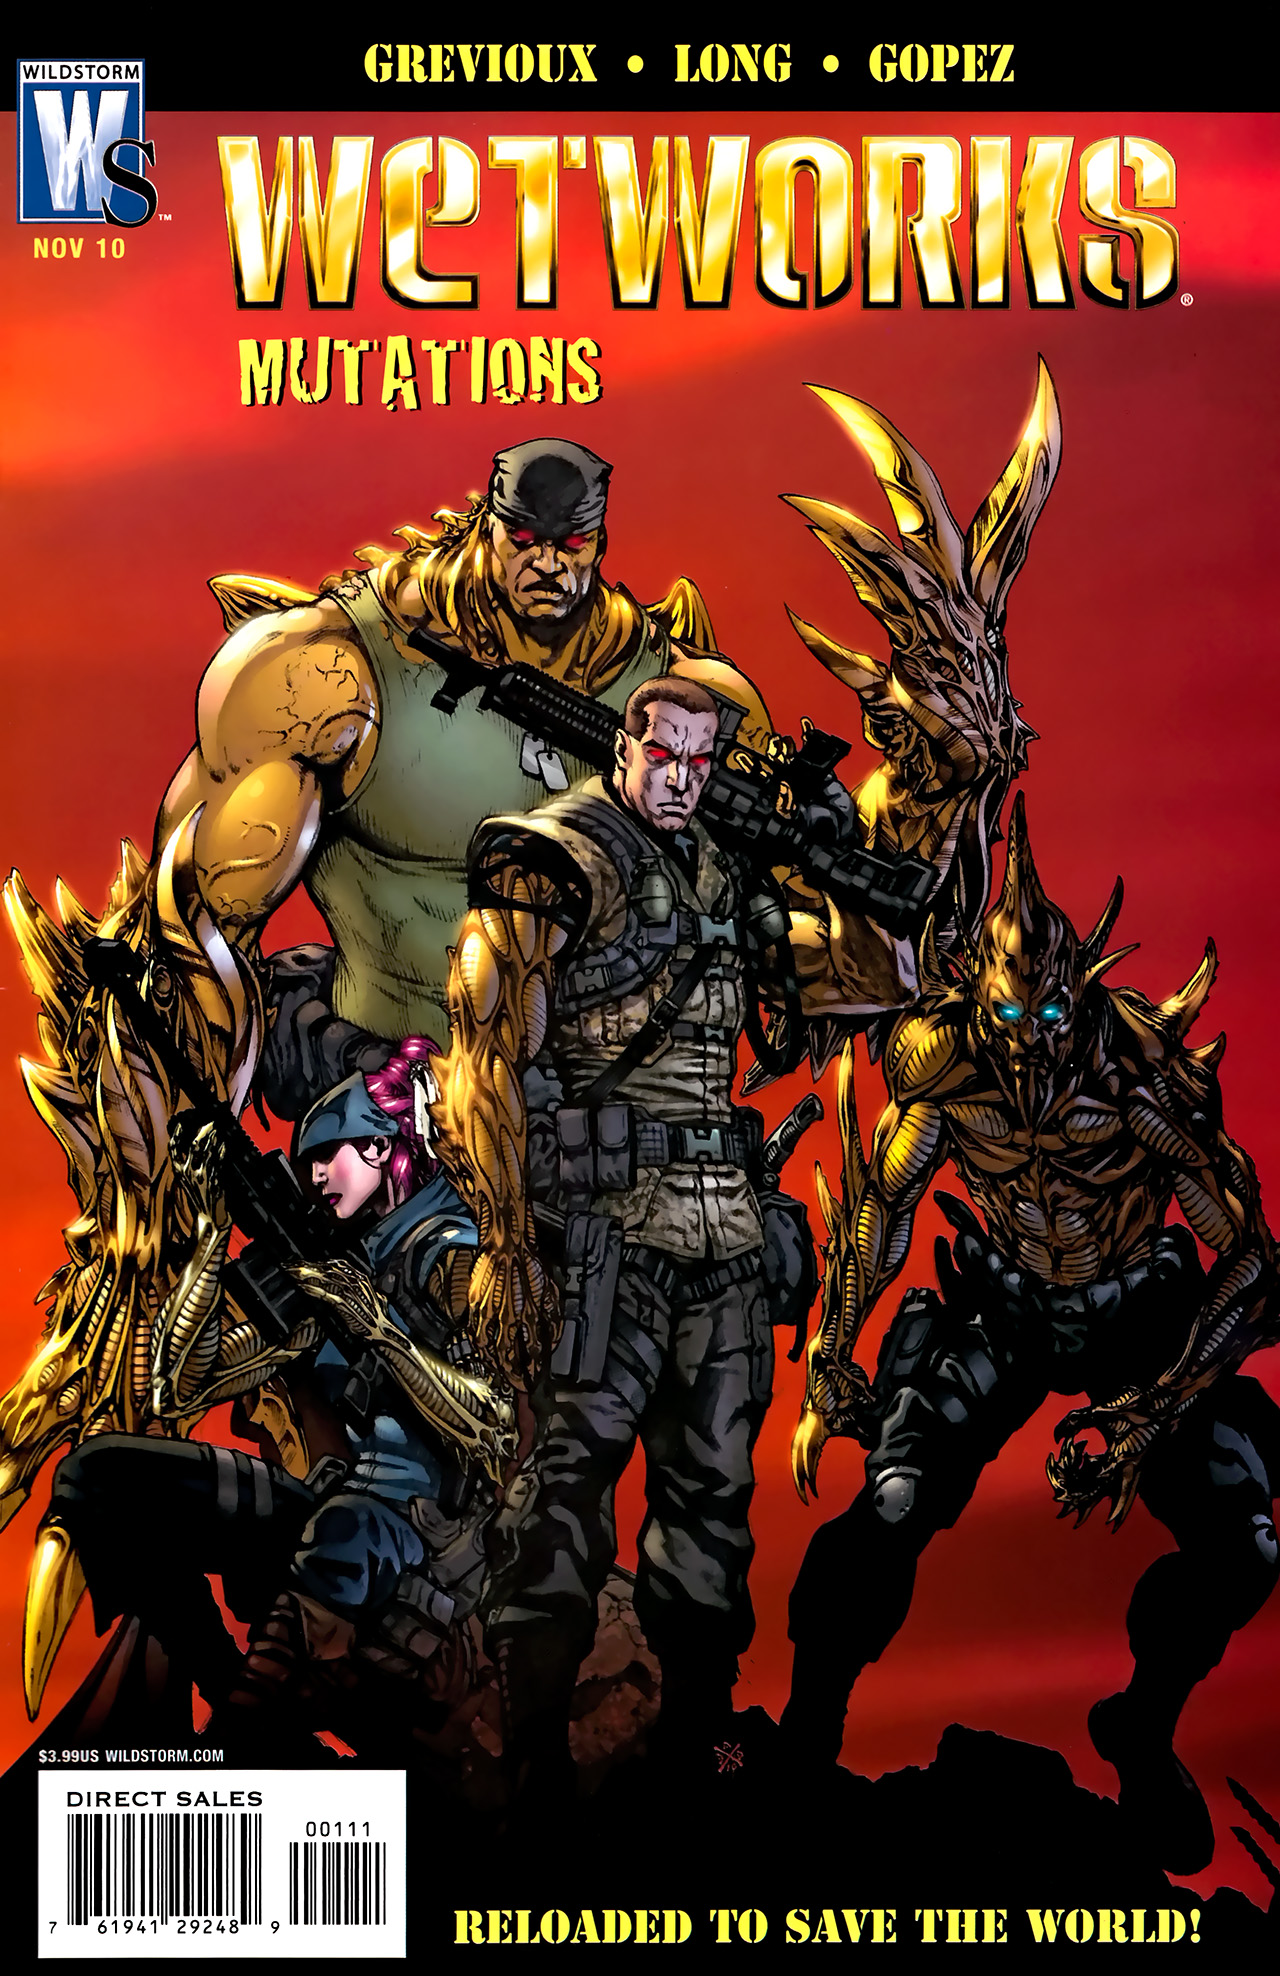 Read online Wetworks: Mutations comic -  Issue # Full - 1